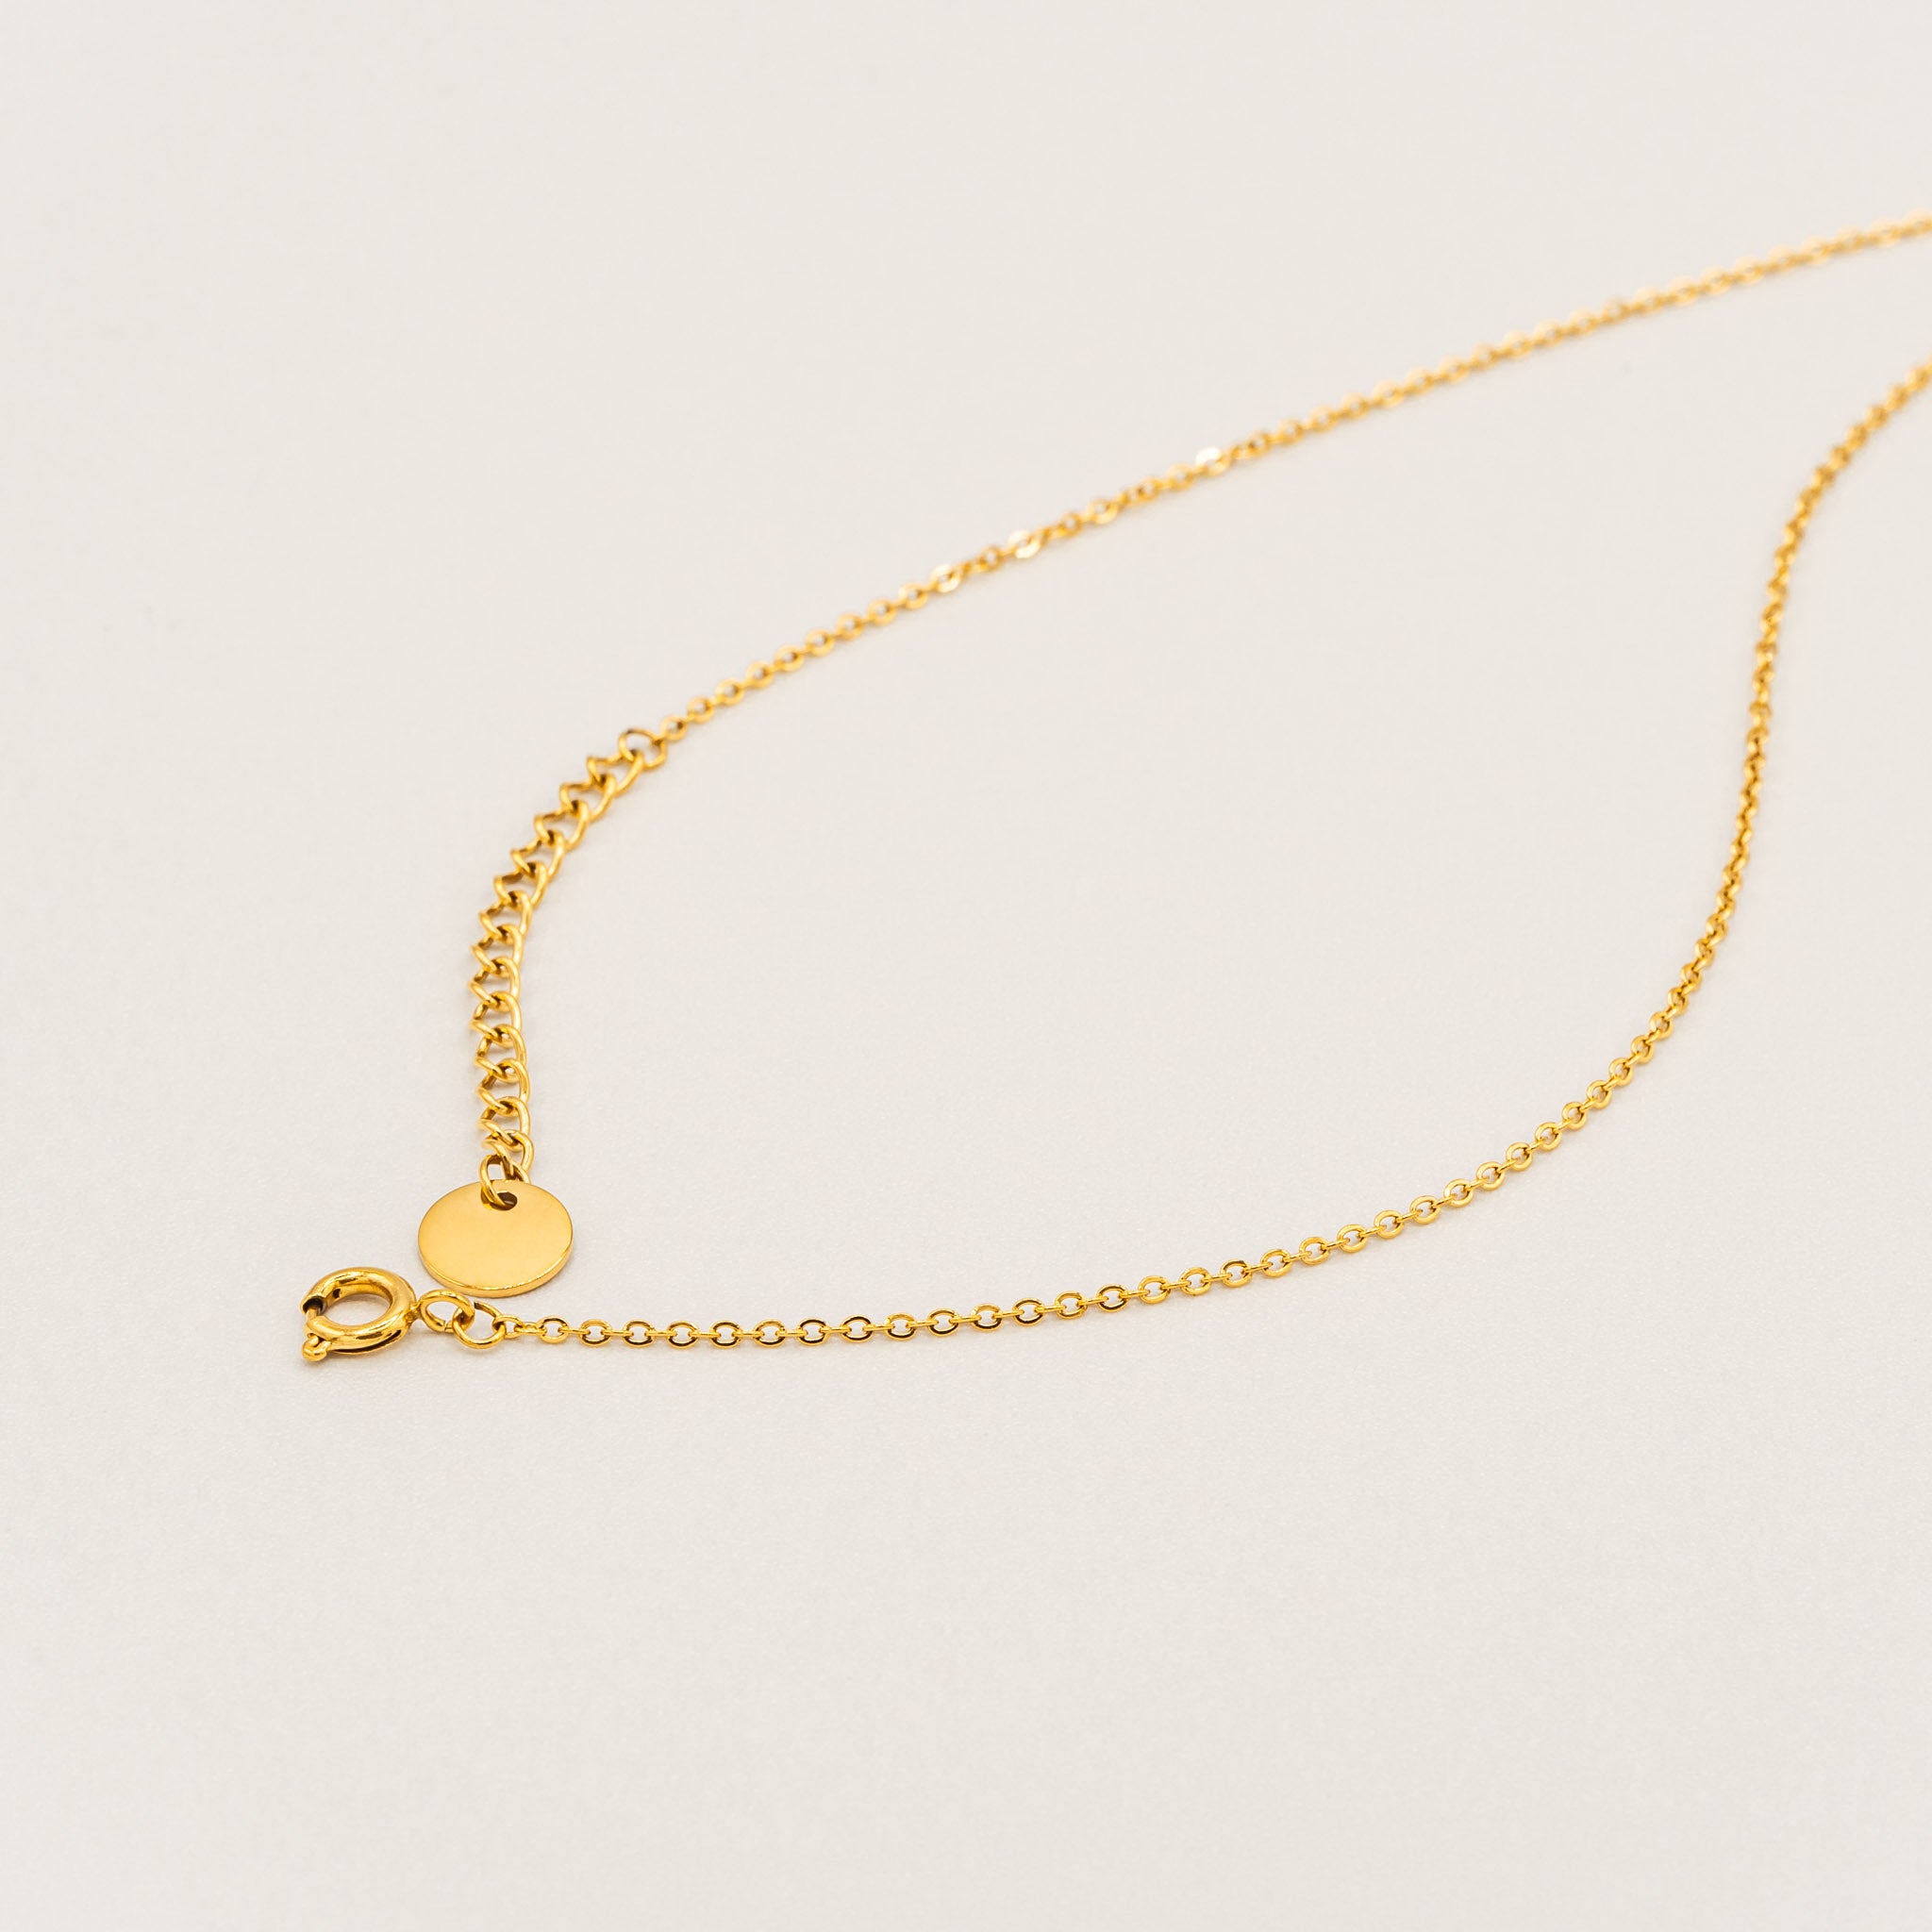 North Star Necklace-Necklaces-Jessica Wang